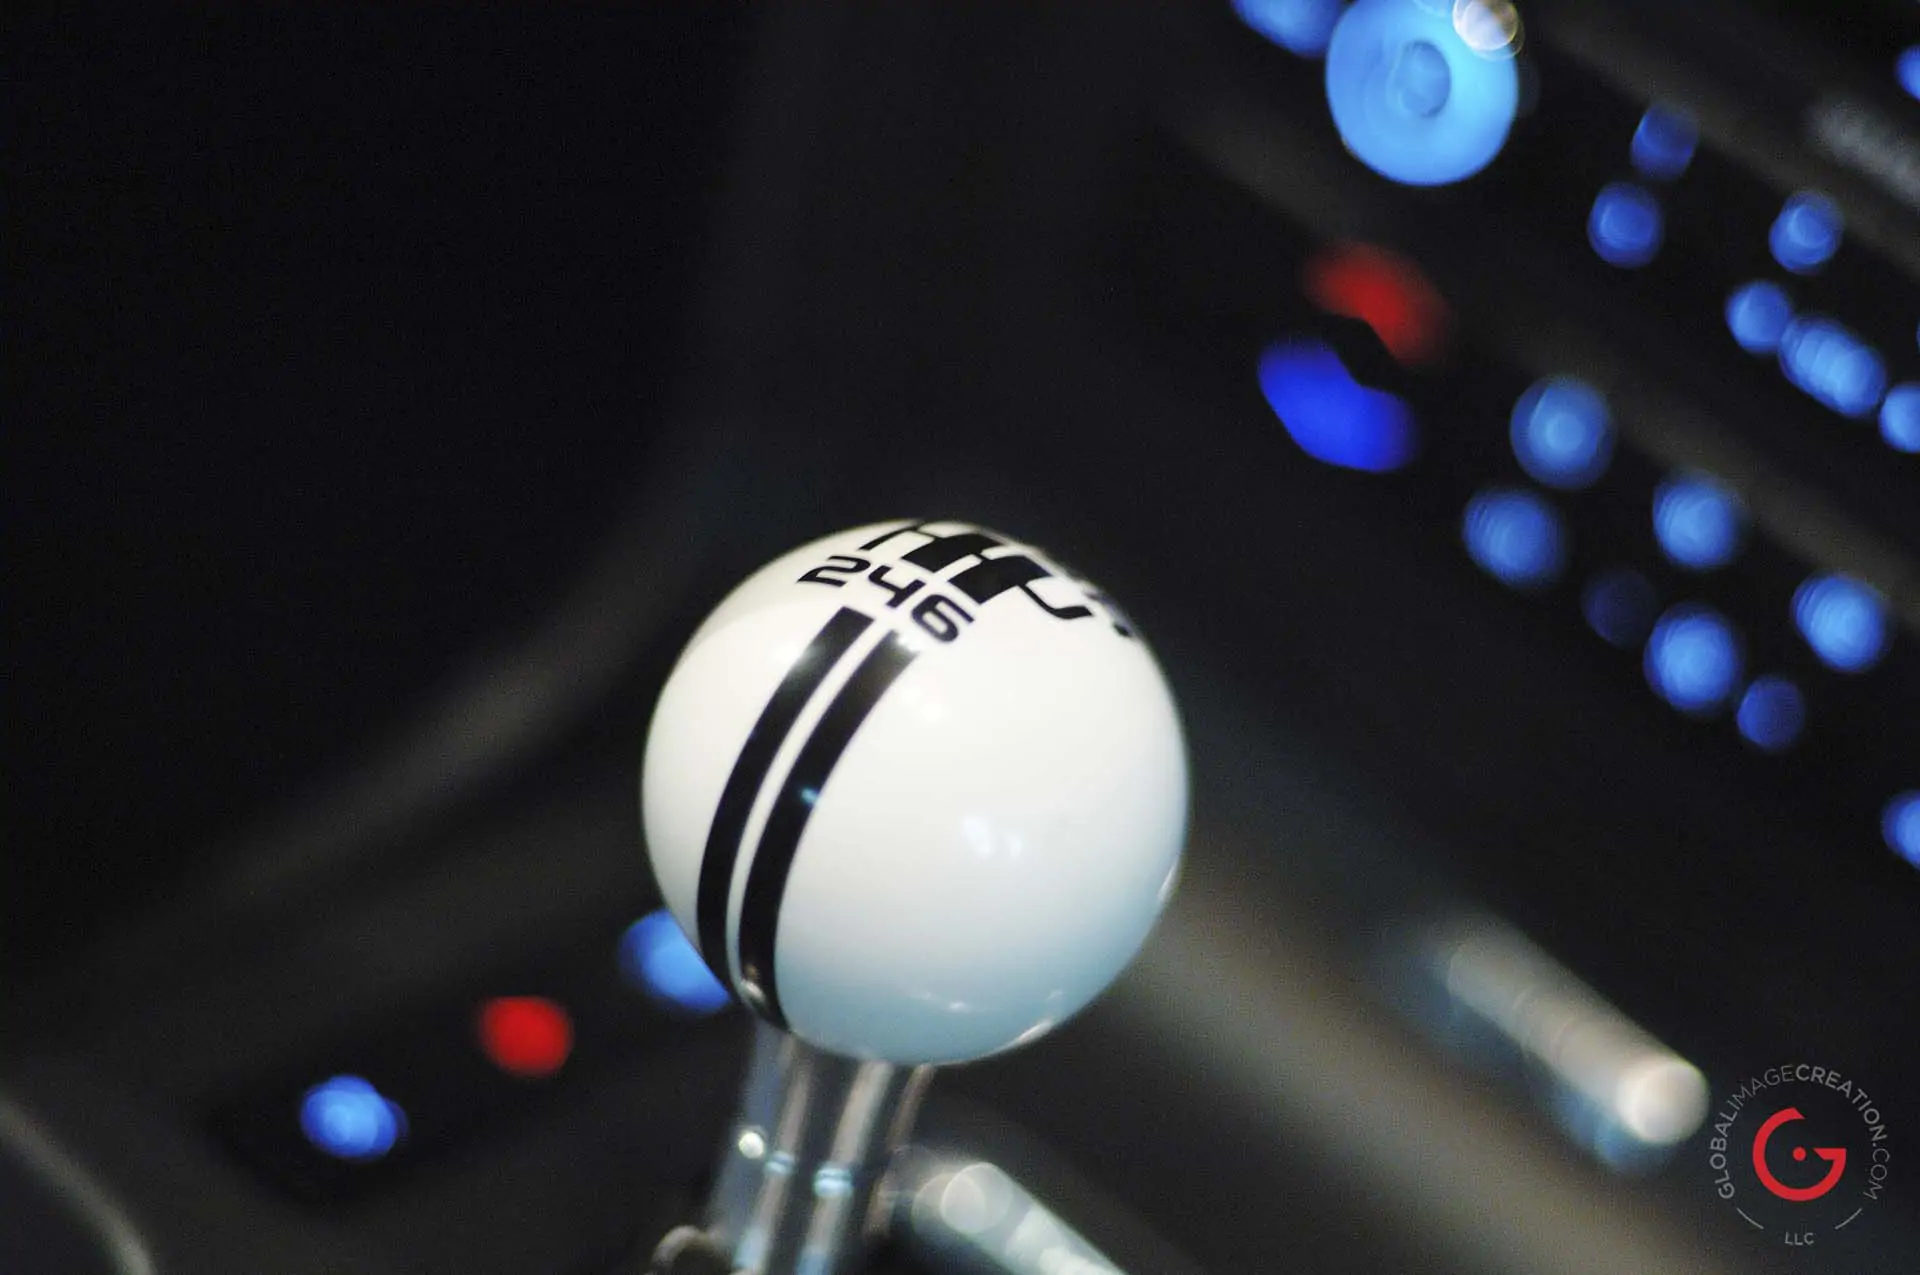 Shelby GT 500 Shifter Detail - Classic Cars Professional Car Photographer, Automotive Photography